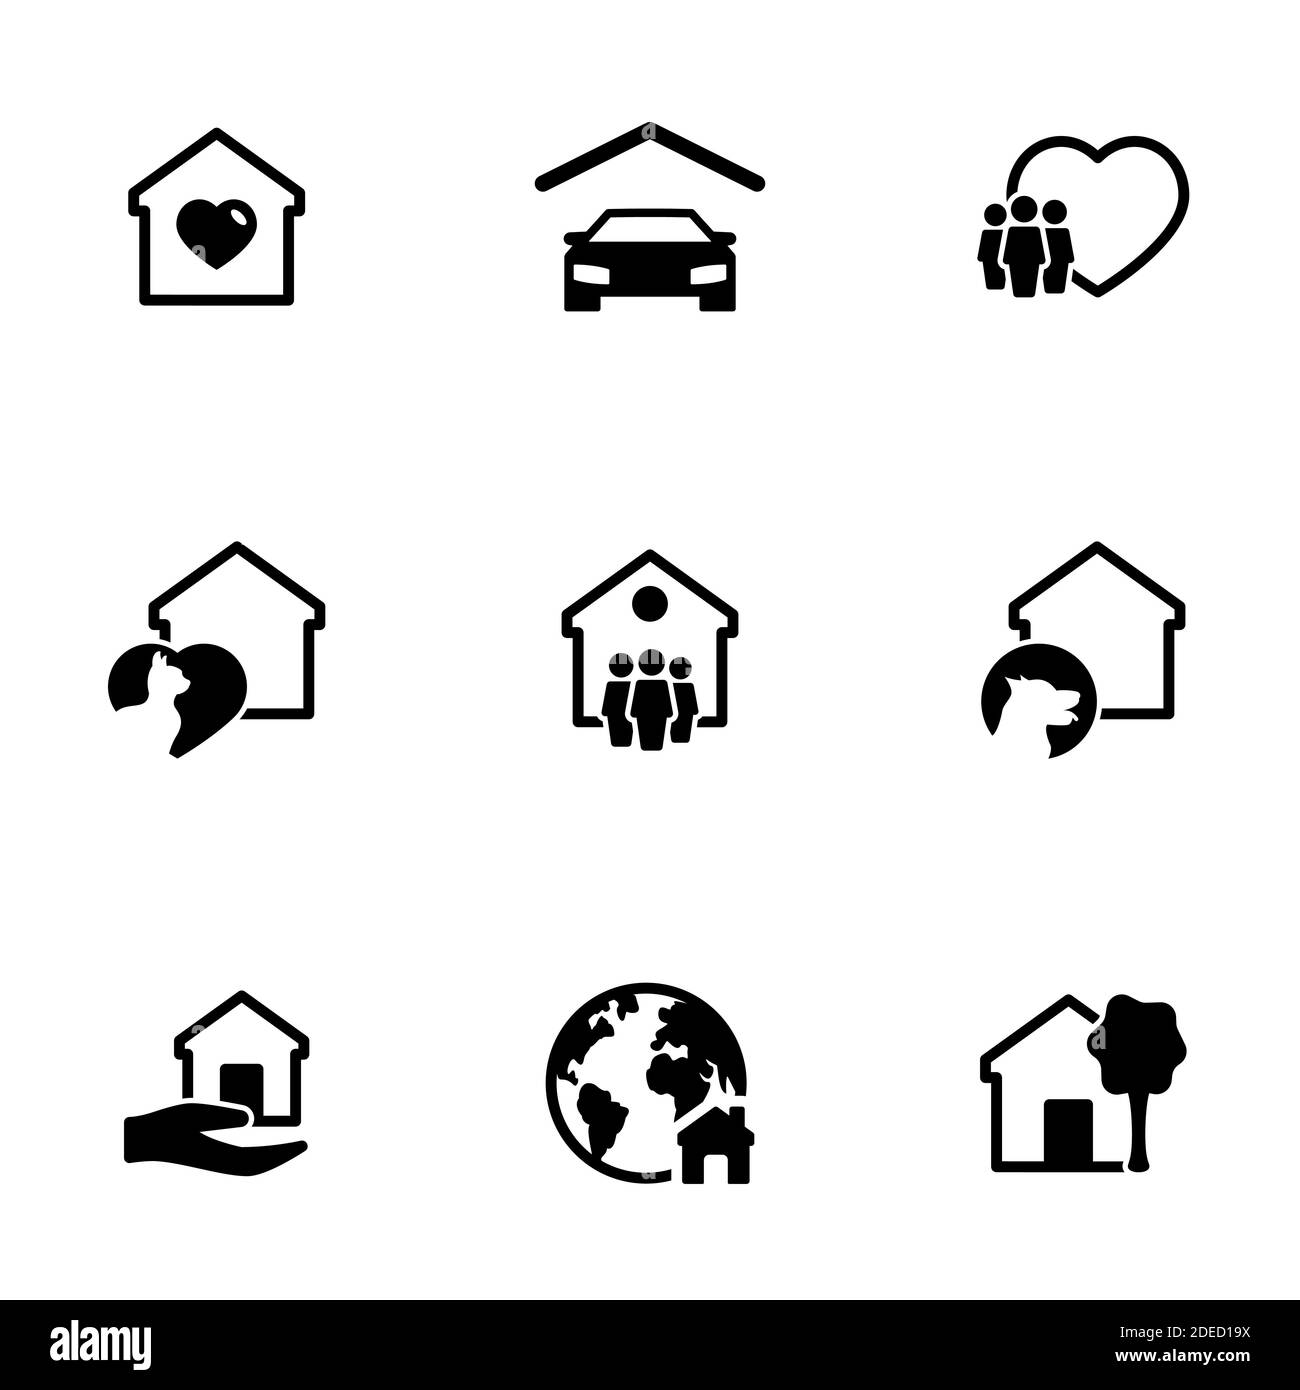 Set of simple icons on a theme Home, family, vector, design, collection, flat, sign, symbol,element, object, illustration, isolated. White background Stock Vector